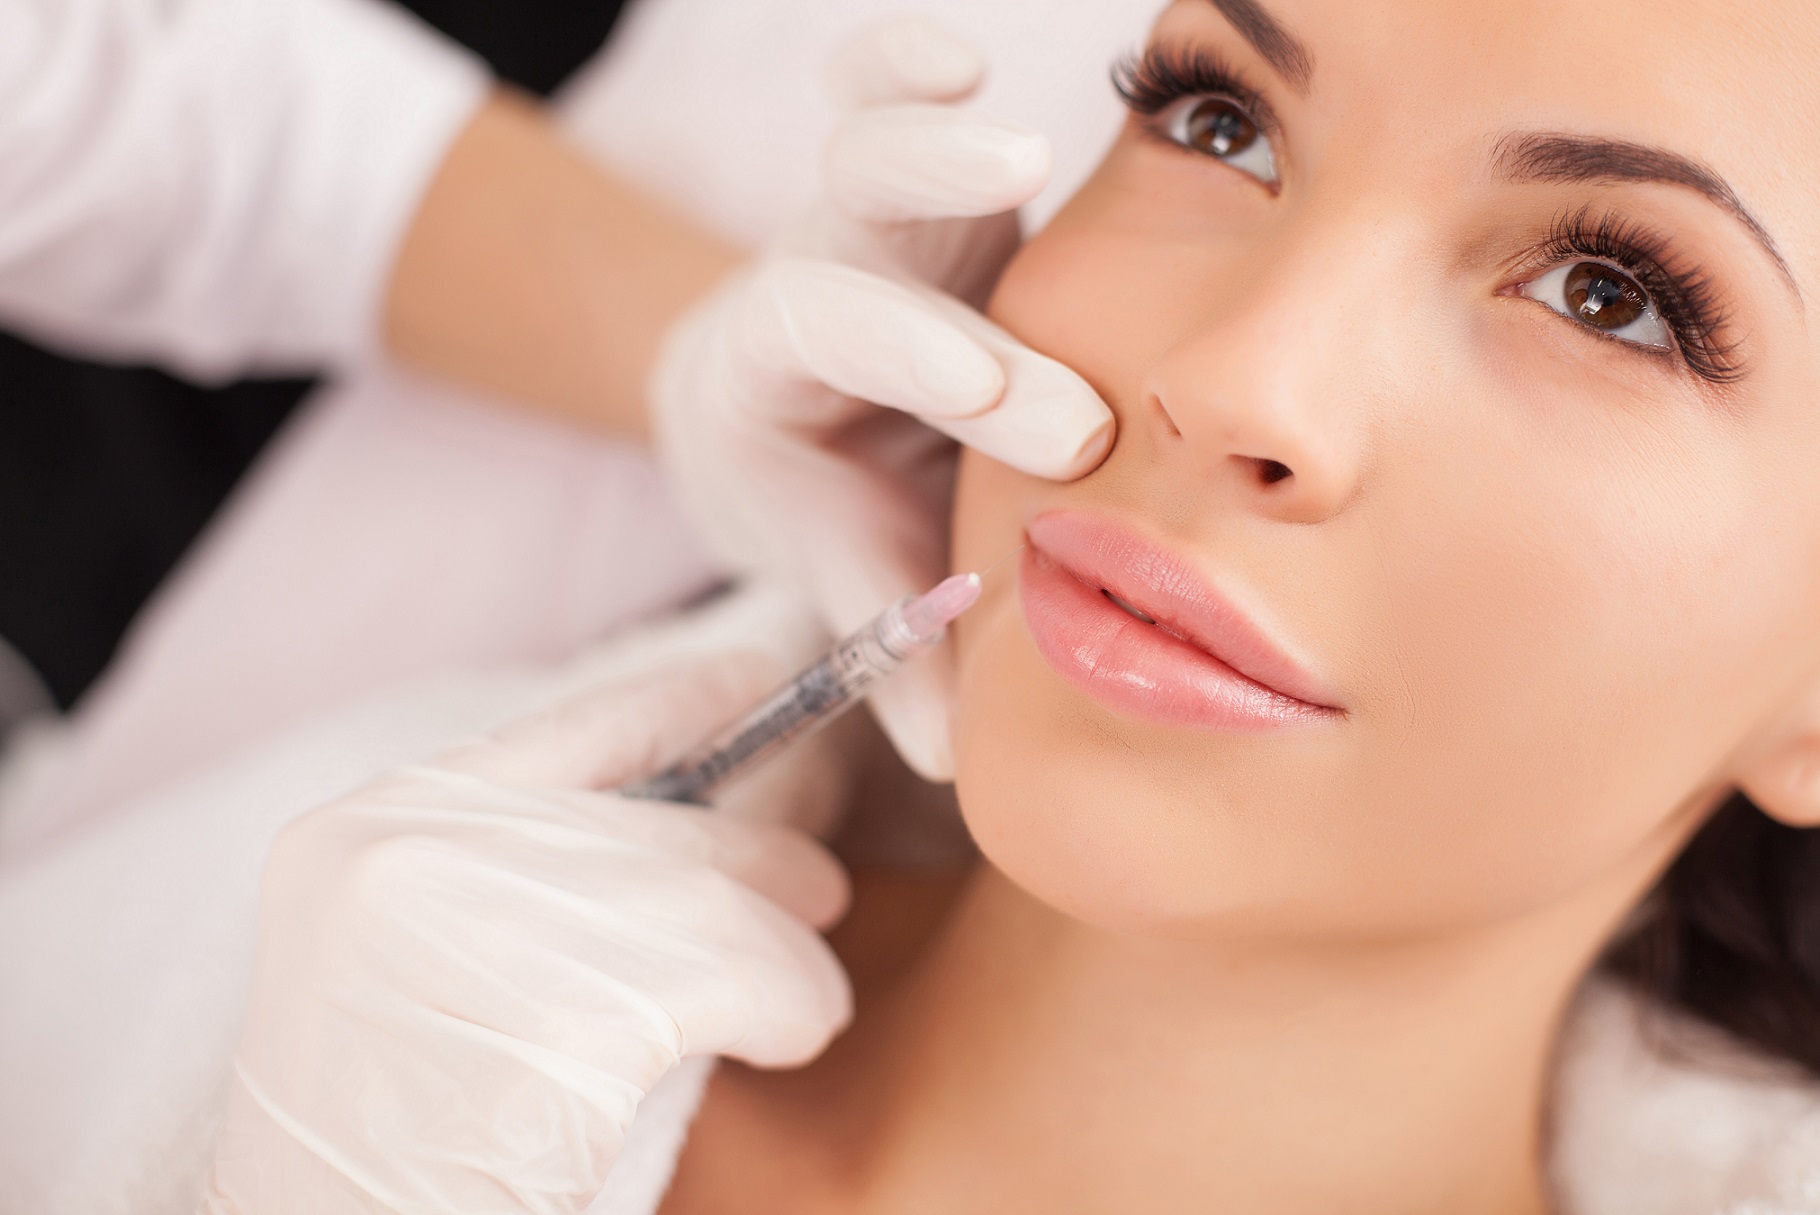 making botox injection in female lips | Healthy Glow Medical in Orlando, FL